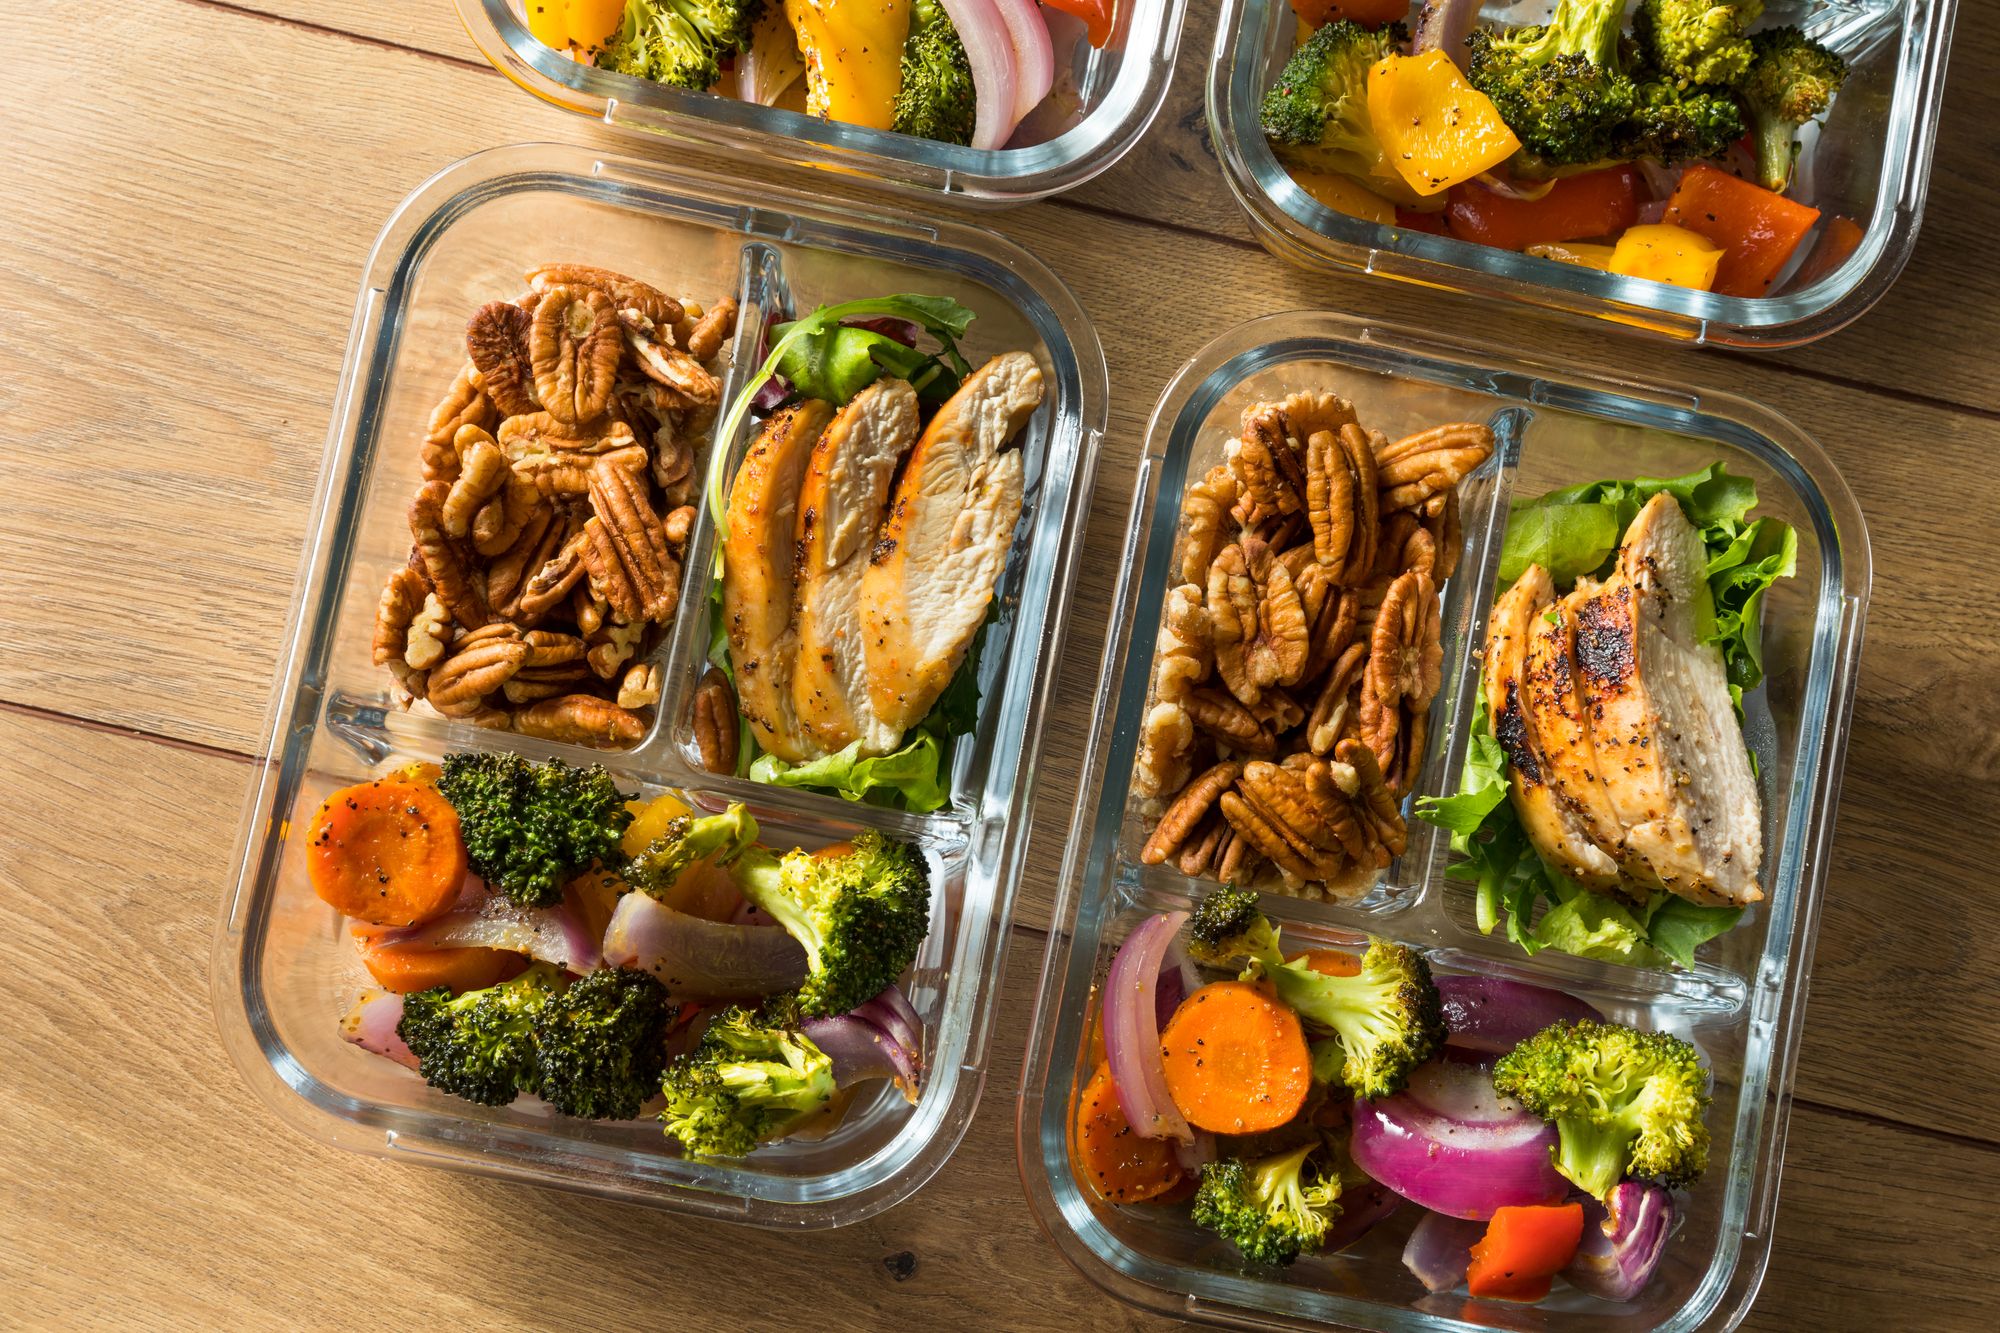 How To Create Delicious Meal Plans You’d Eat for a High Protein Diet